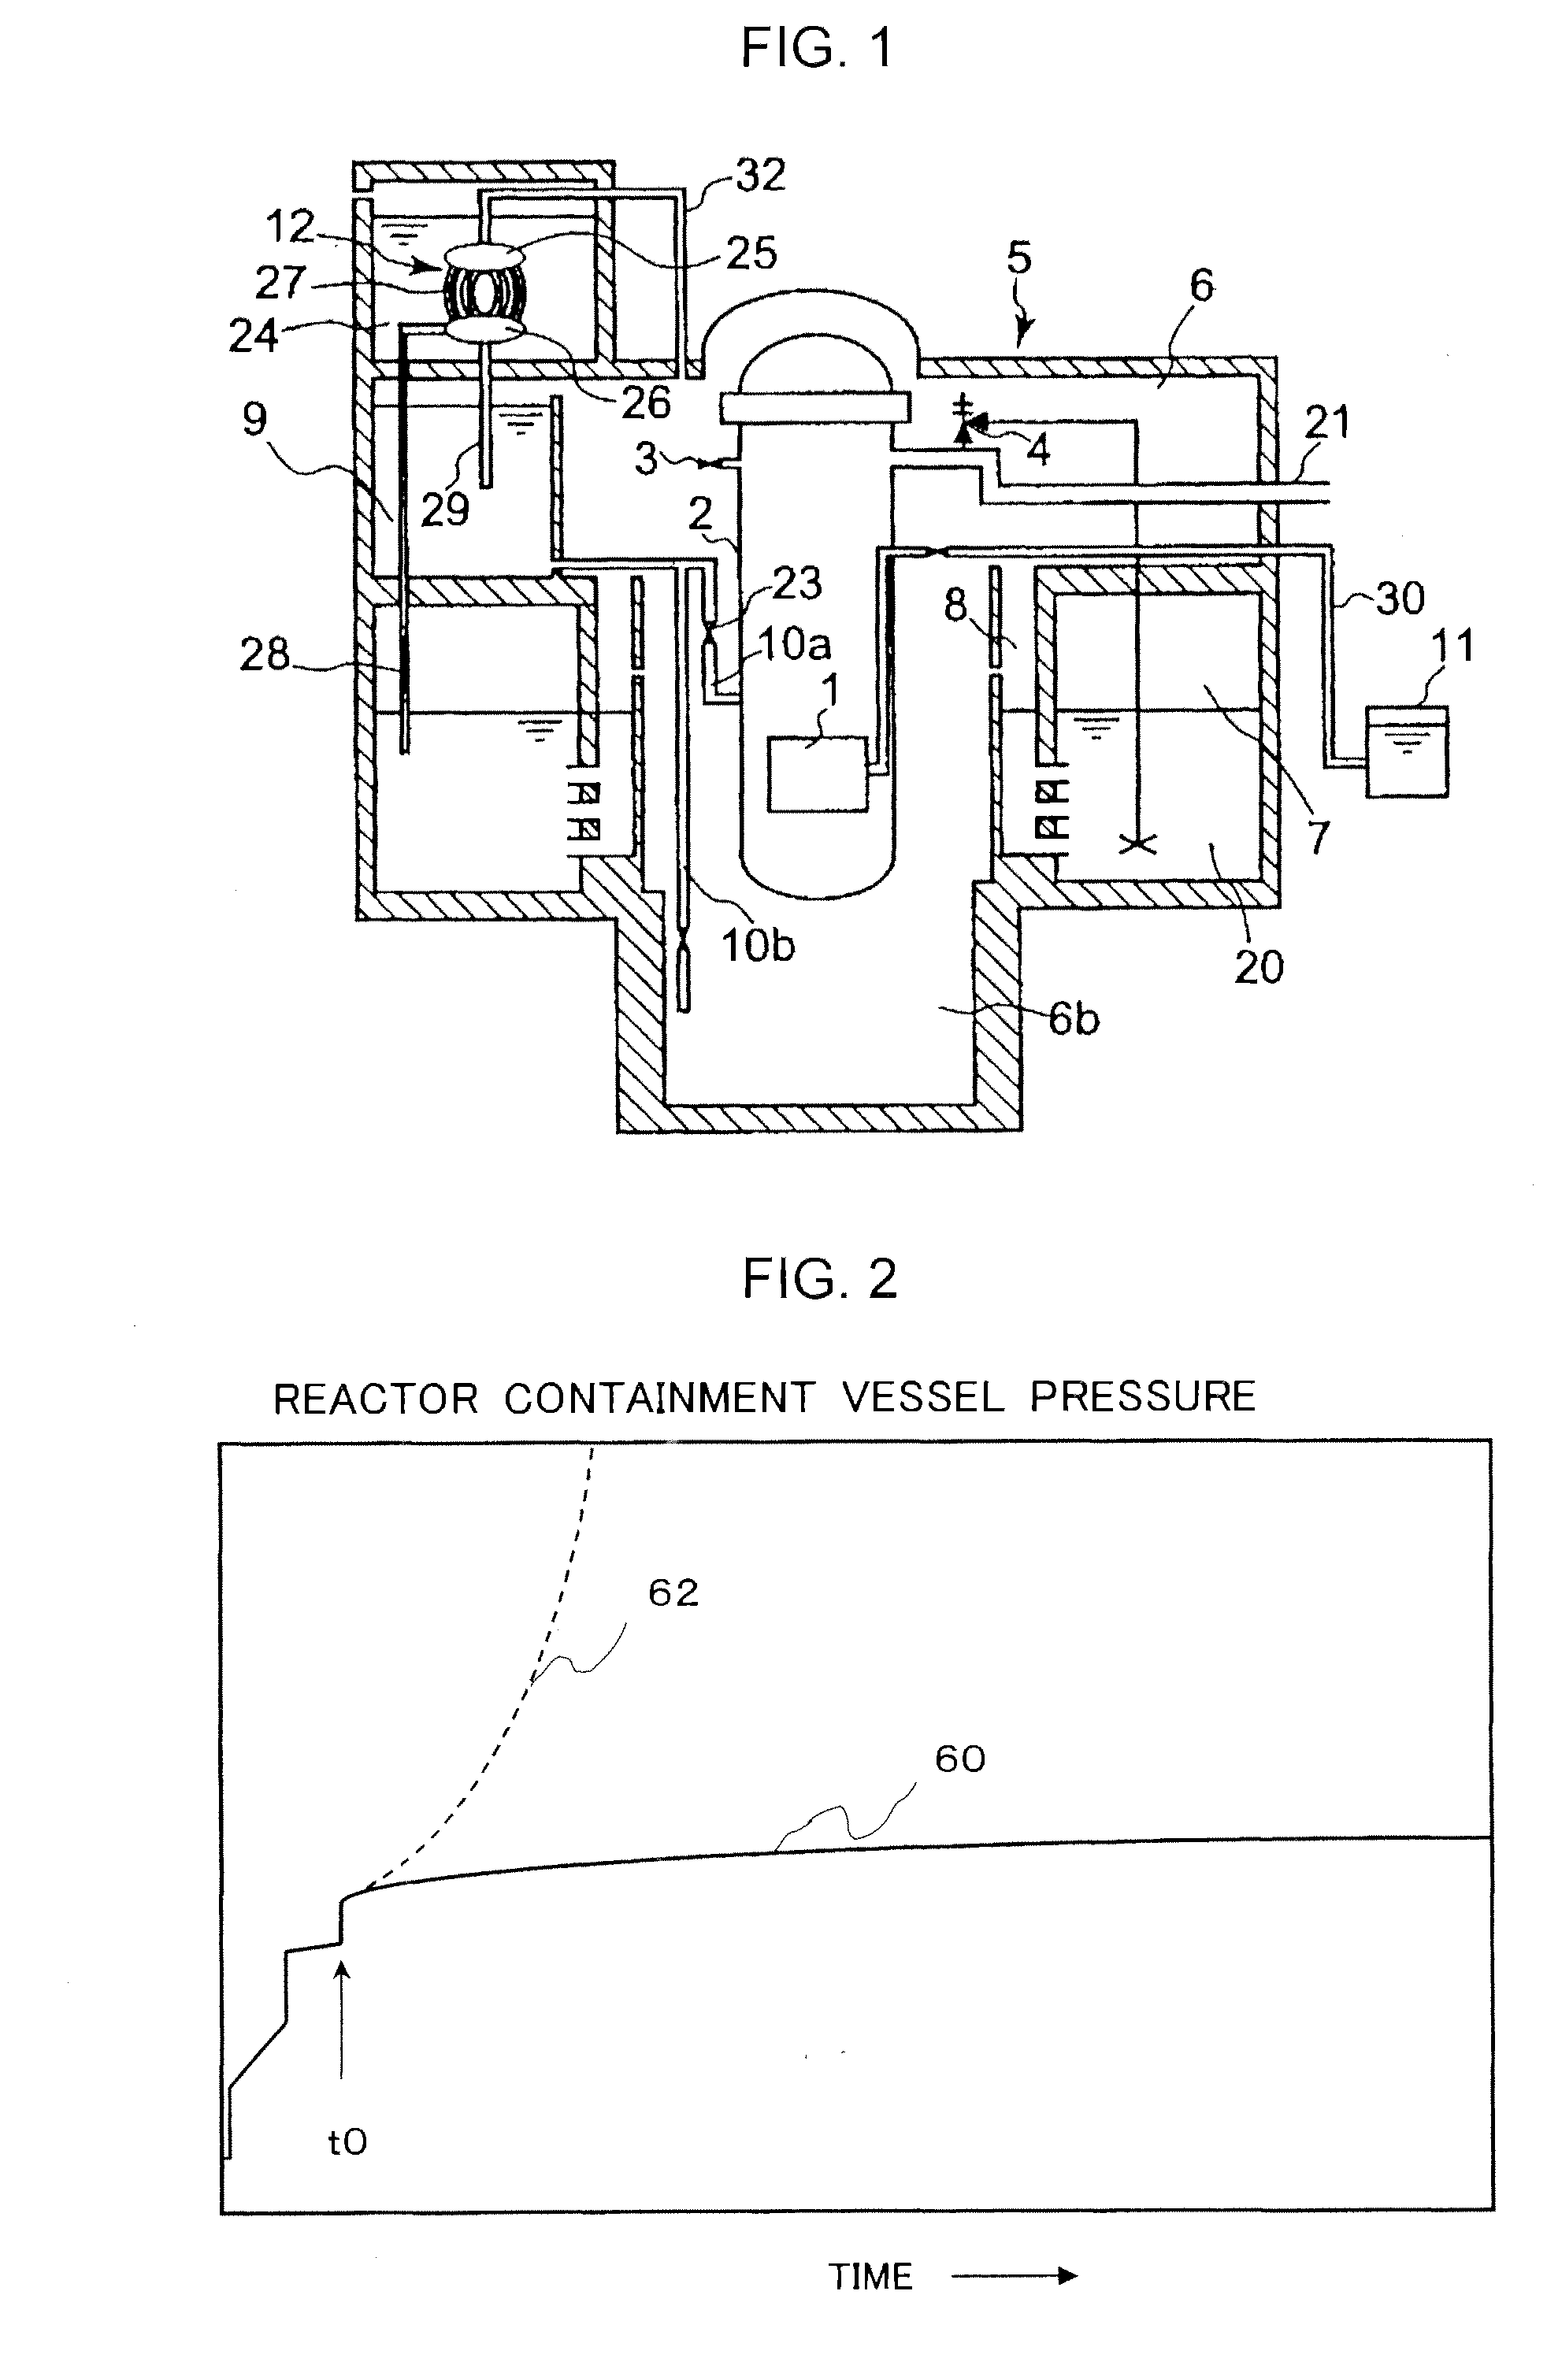 Boiling water nuclear reactor and emergency core cooling system of the same